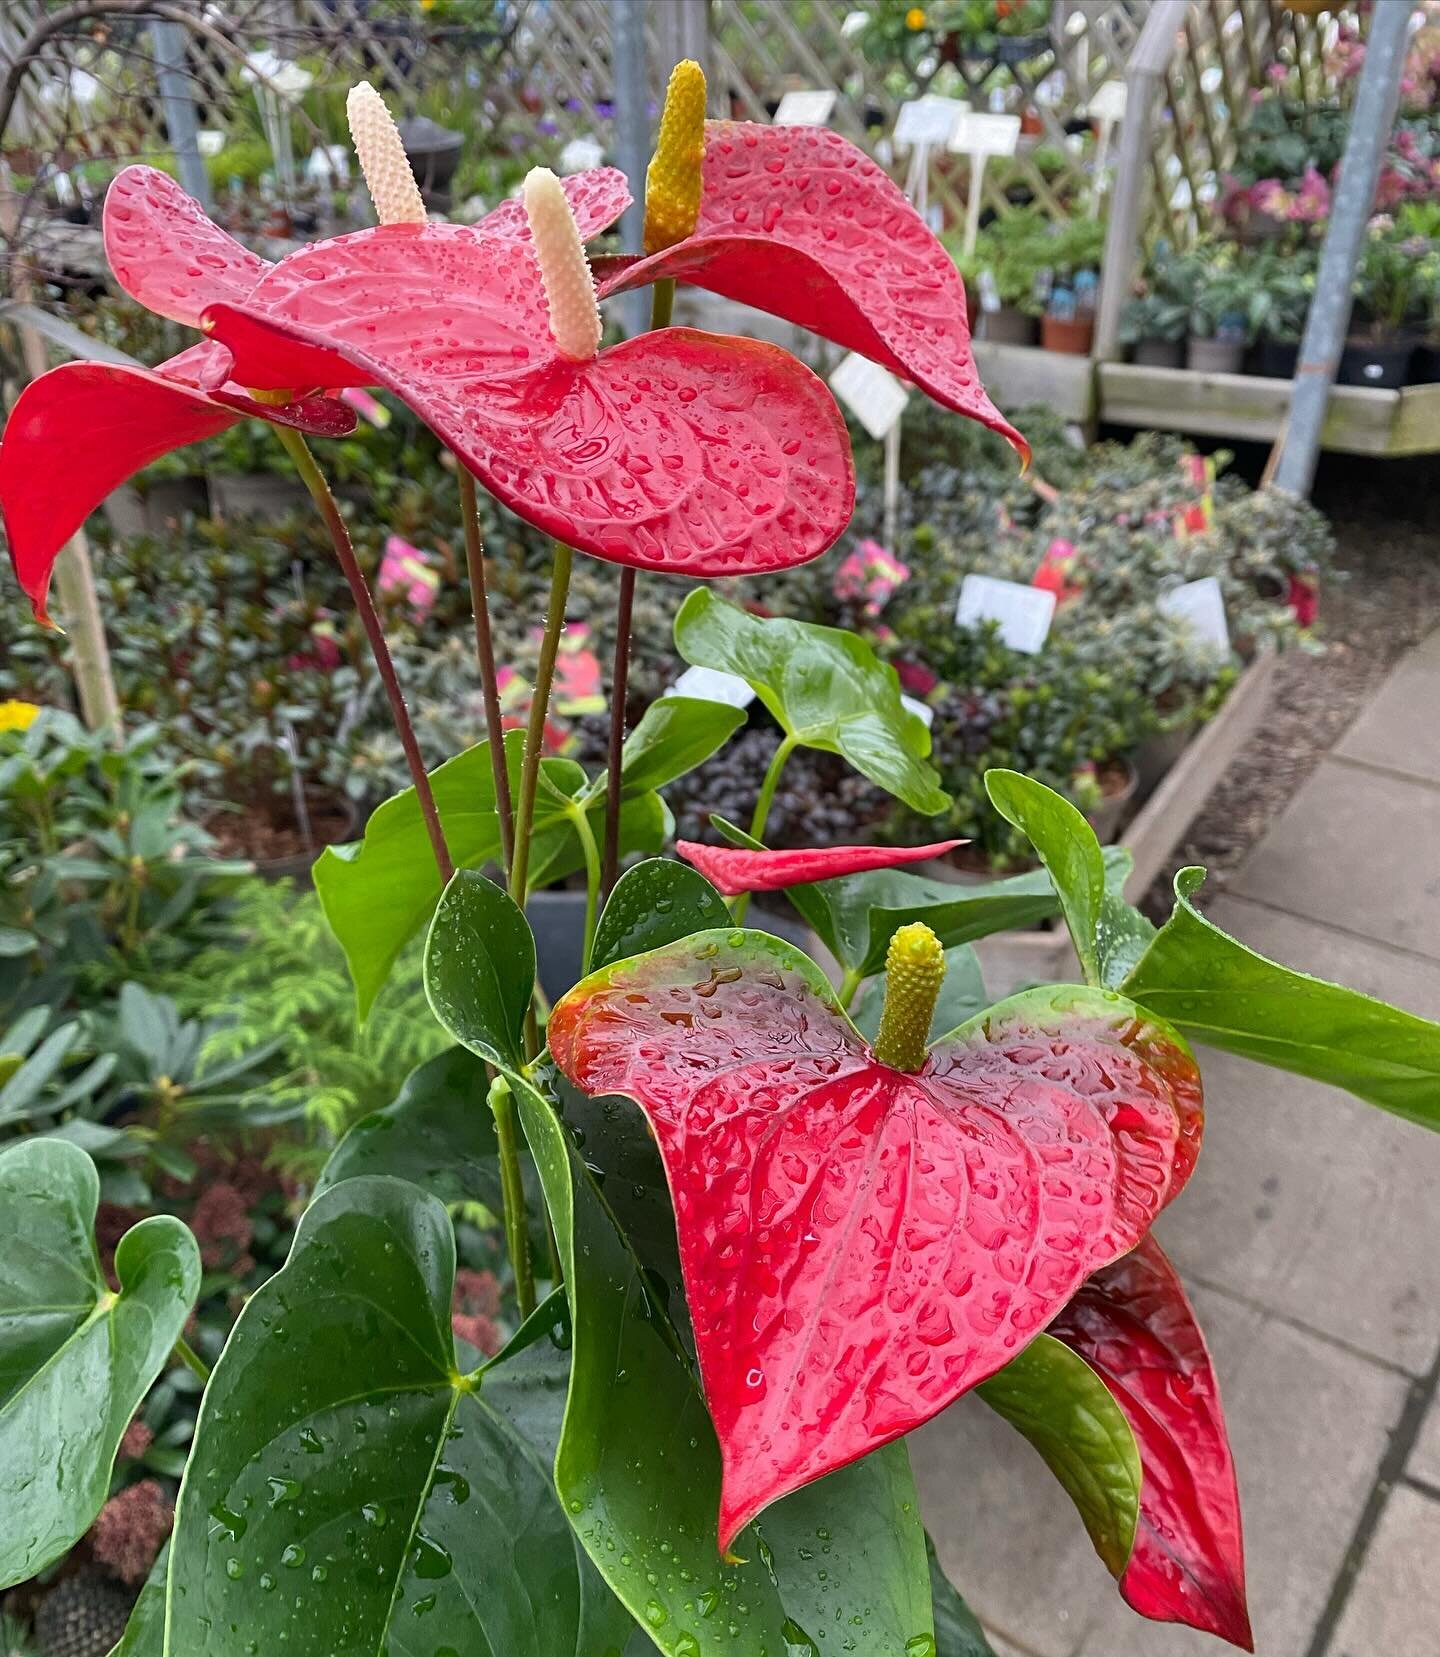 Fantastic new selection of houseplants now available, including Anthurium, Aechmea and  Bromelia. Simply stunning! 😍 🌼🌸🌺🌿🌿🌿🥰
#millgardencentre #houseplants #plantsmakepeoplehappy #flowers #garden #gardenlife